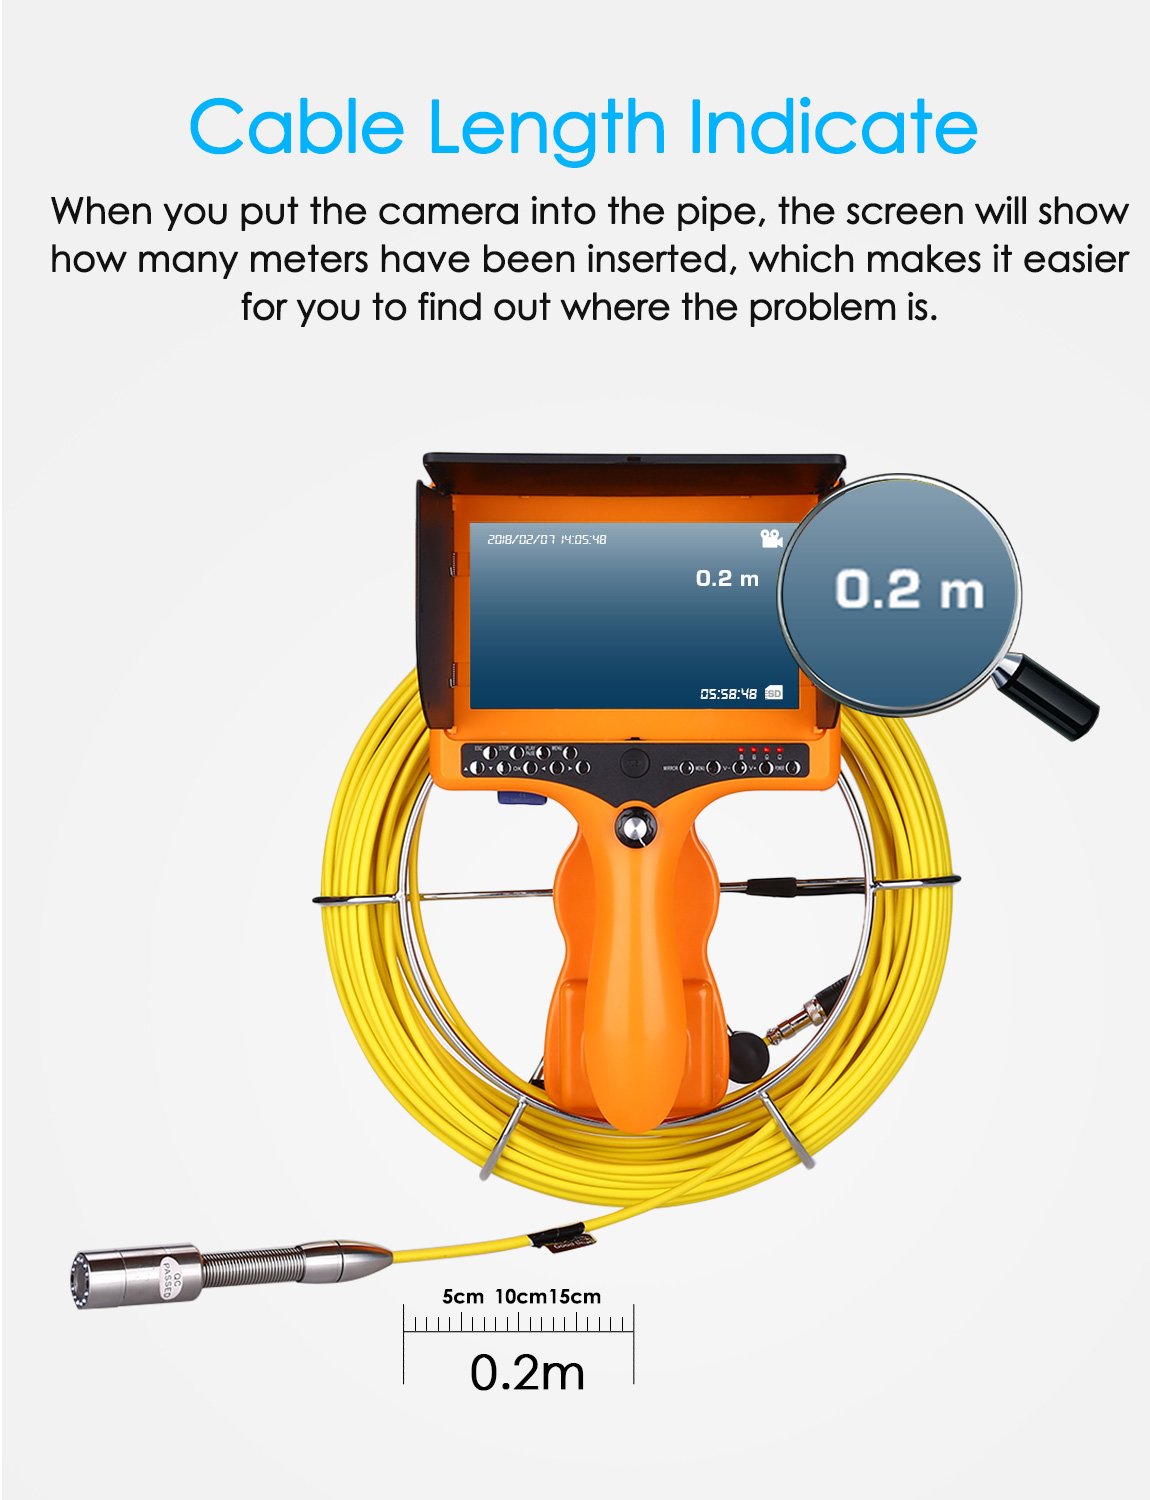 Eyoyo 9600A Pipeline Endoscope Inspection Camera 20M Underwater Industrial  Pipe Sewer Drain Wall Video Plumbing System with 9 Inch LCD Monitor 1000TVL